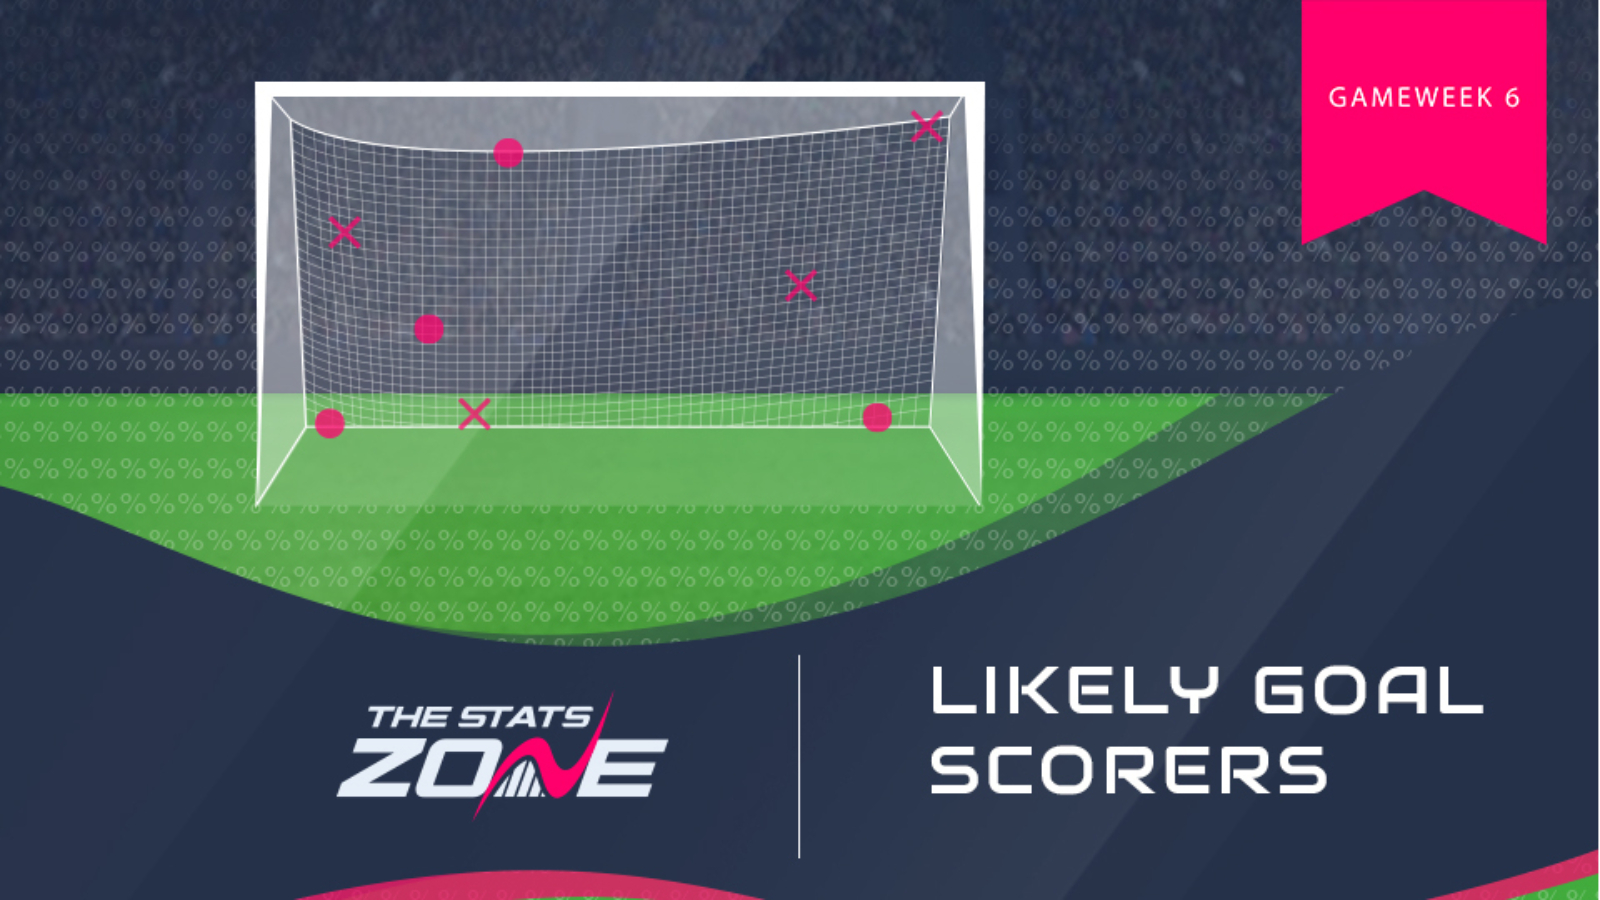 FPL Gameweek 6 – likely goalscorers - The Stats Zone